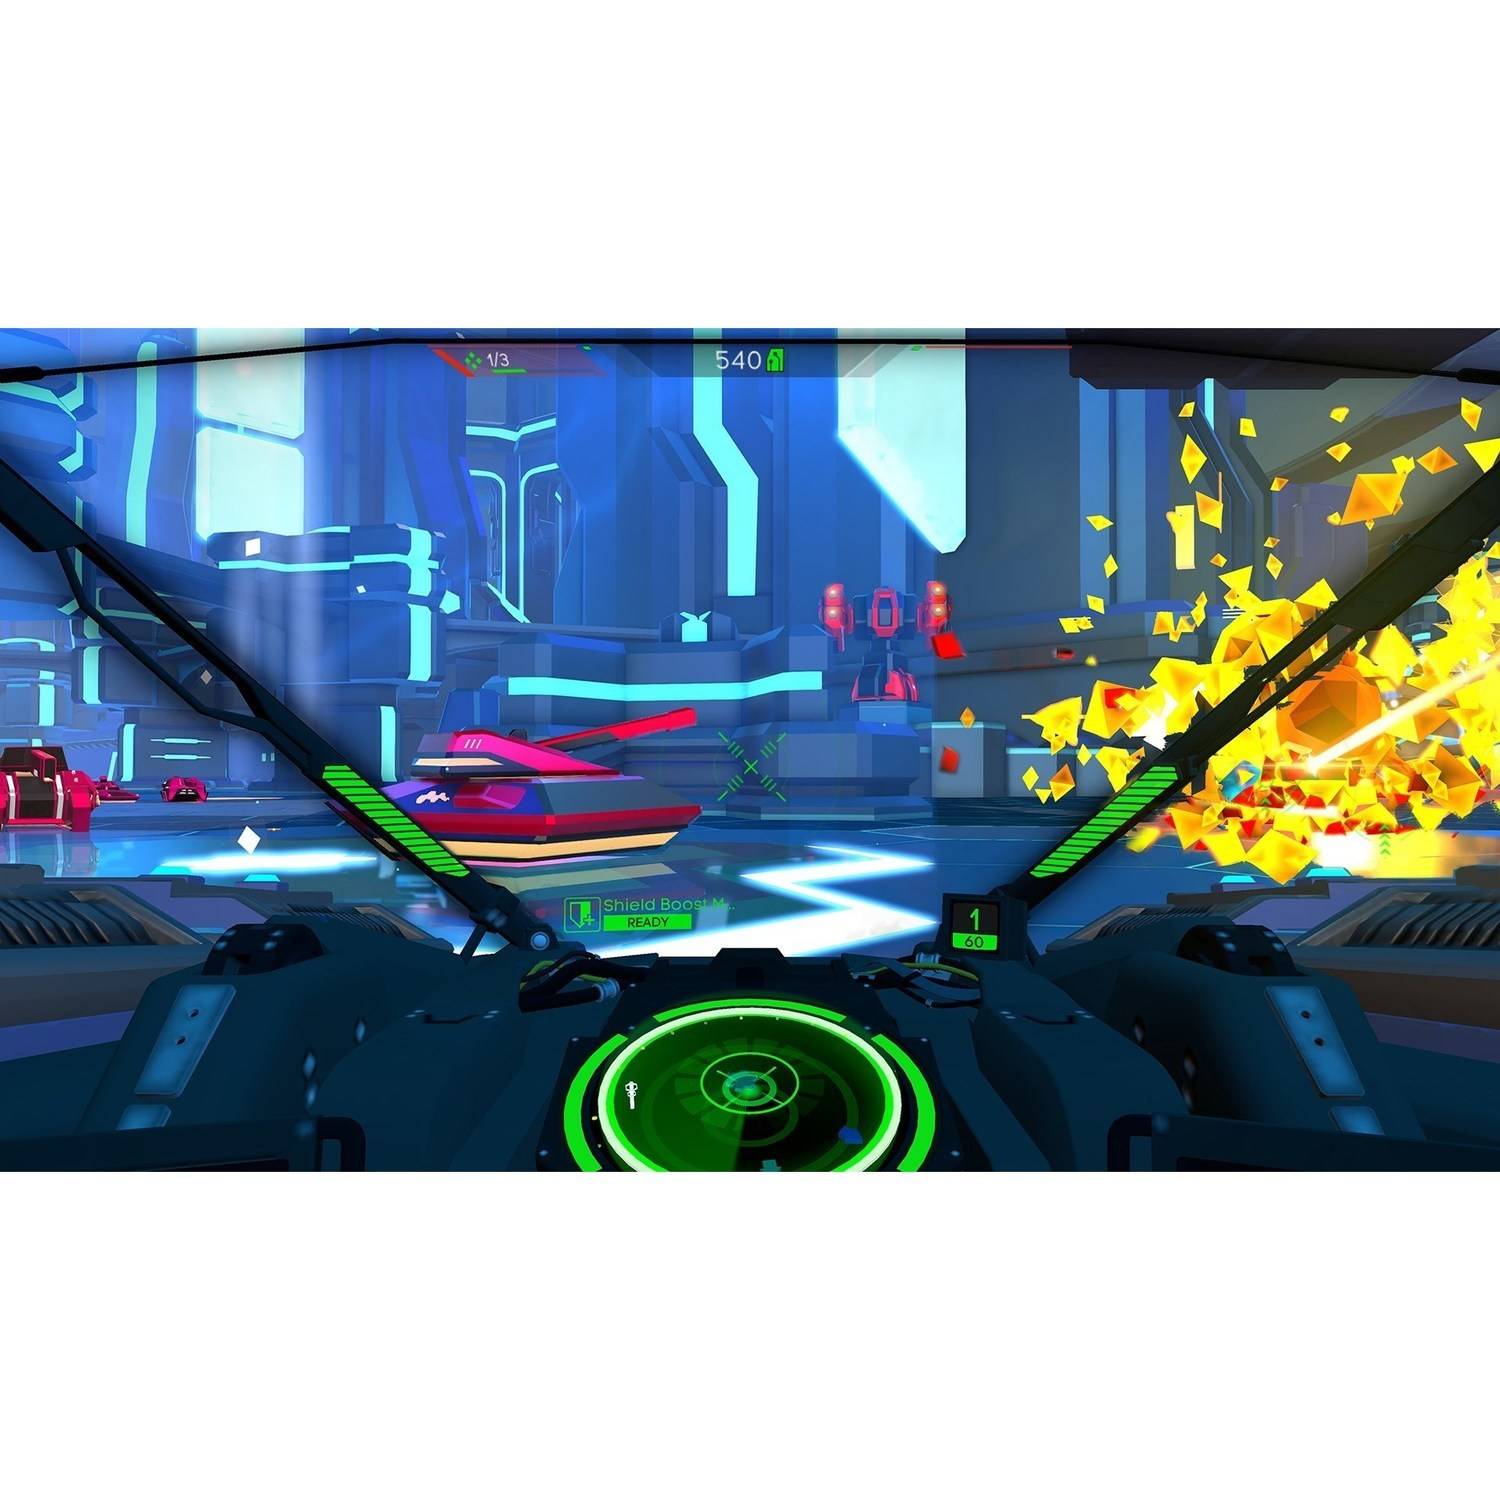 Battlezone VR - Pre-Owned (PS4) - image 2 of 8